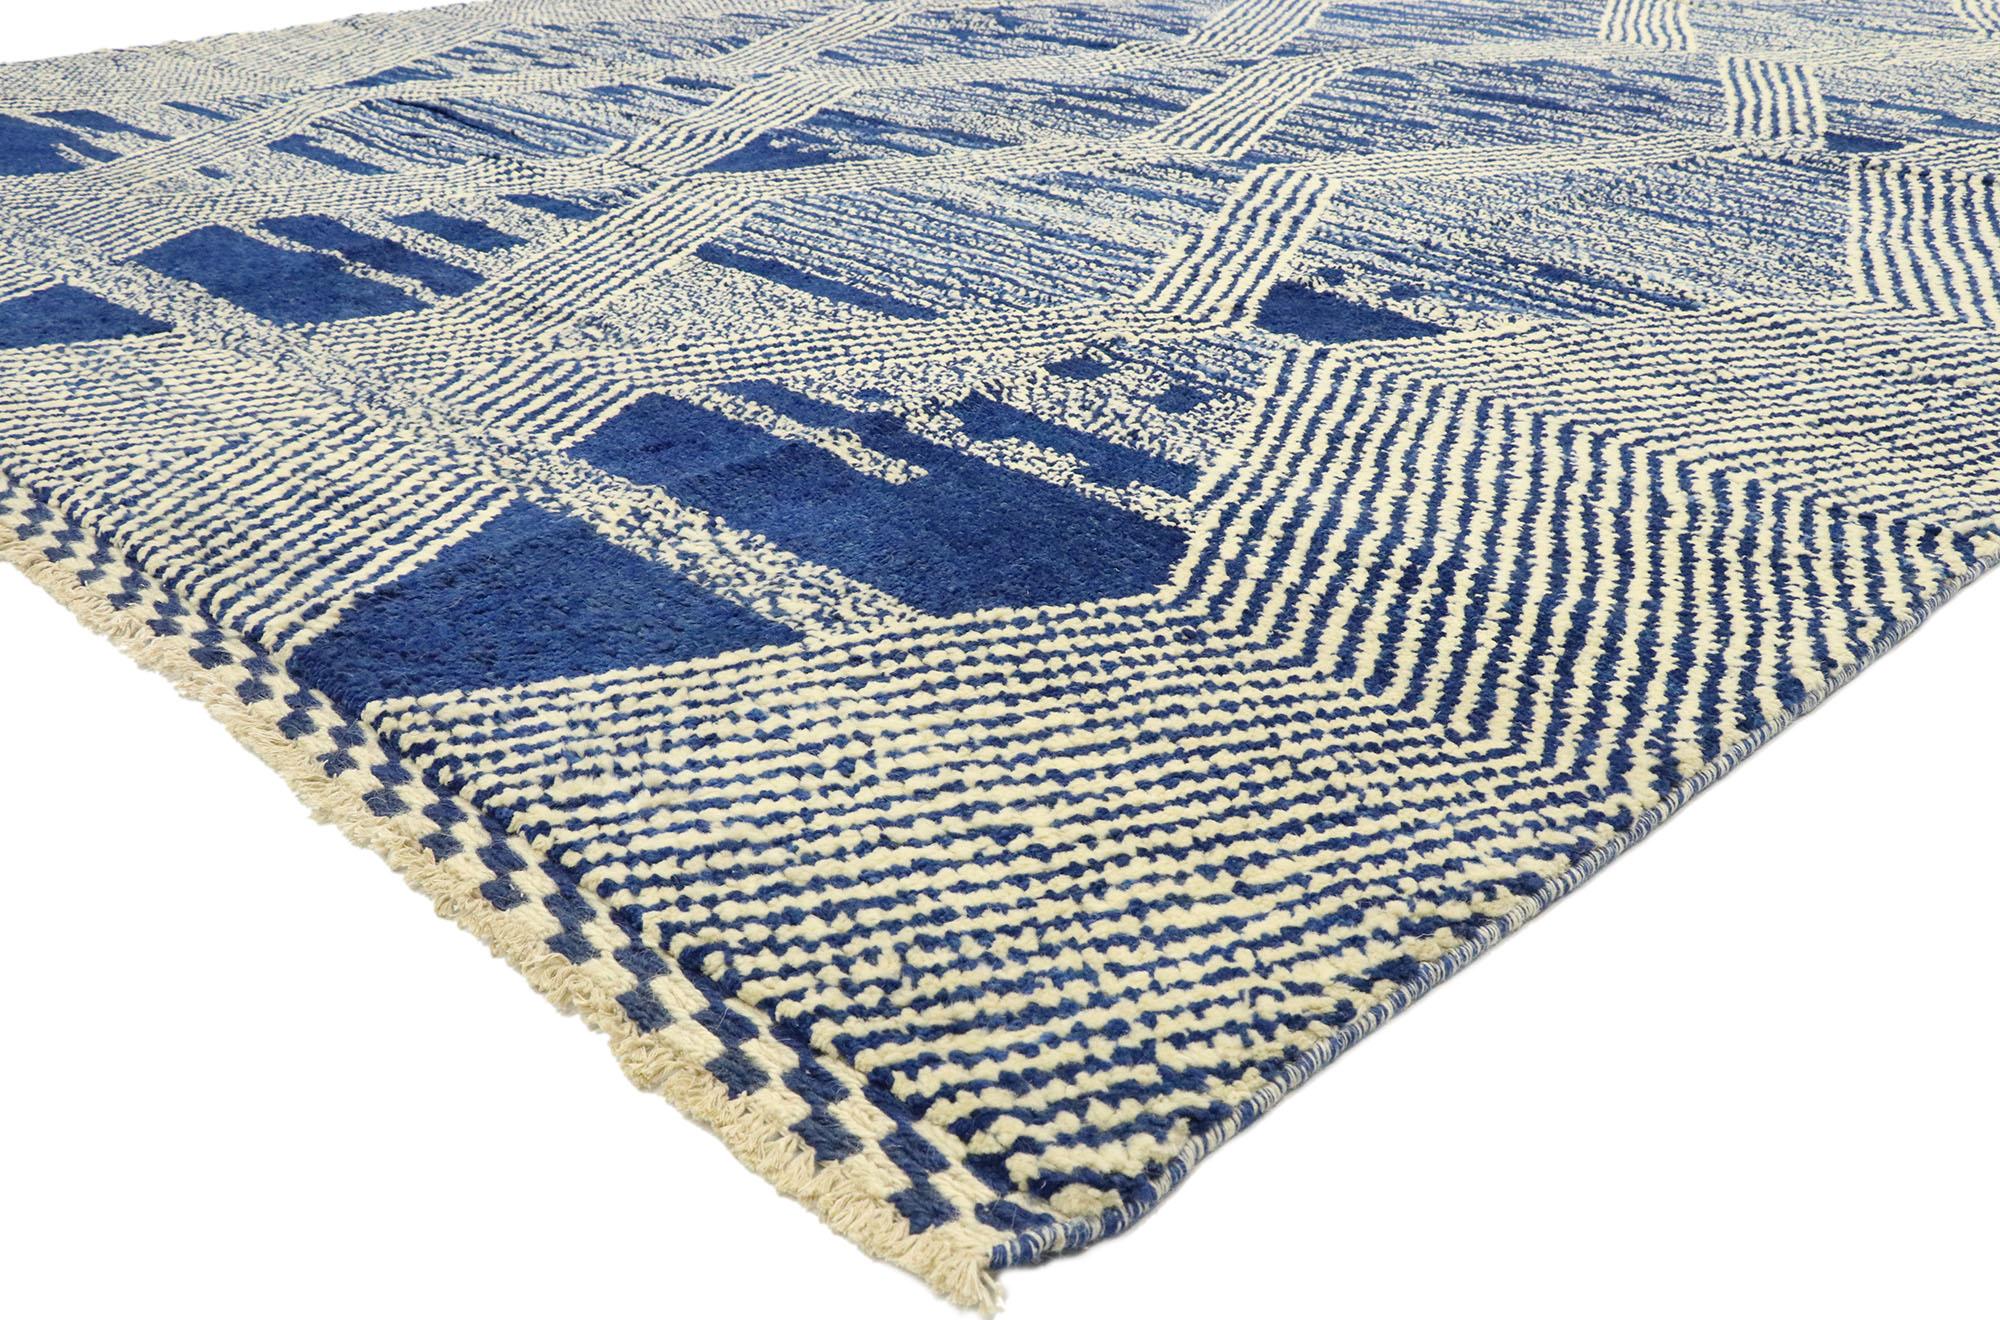 80586 Modern Style Blue Moroccan Rug, 10'05 x 14'01.
Deconstructivism meets cozy nomad in this hand knotted wool Moroccan style rug. The conceptual design elements and visually stirking colors woven into this piece work together creating a modernist